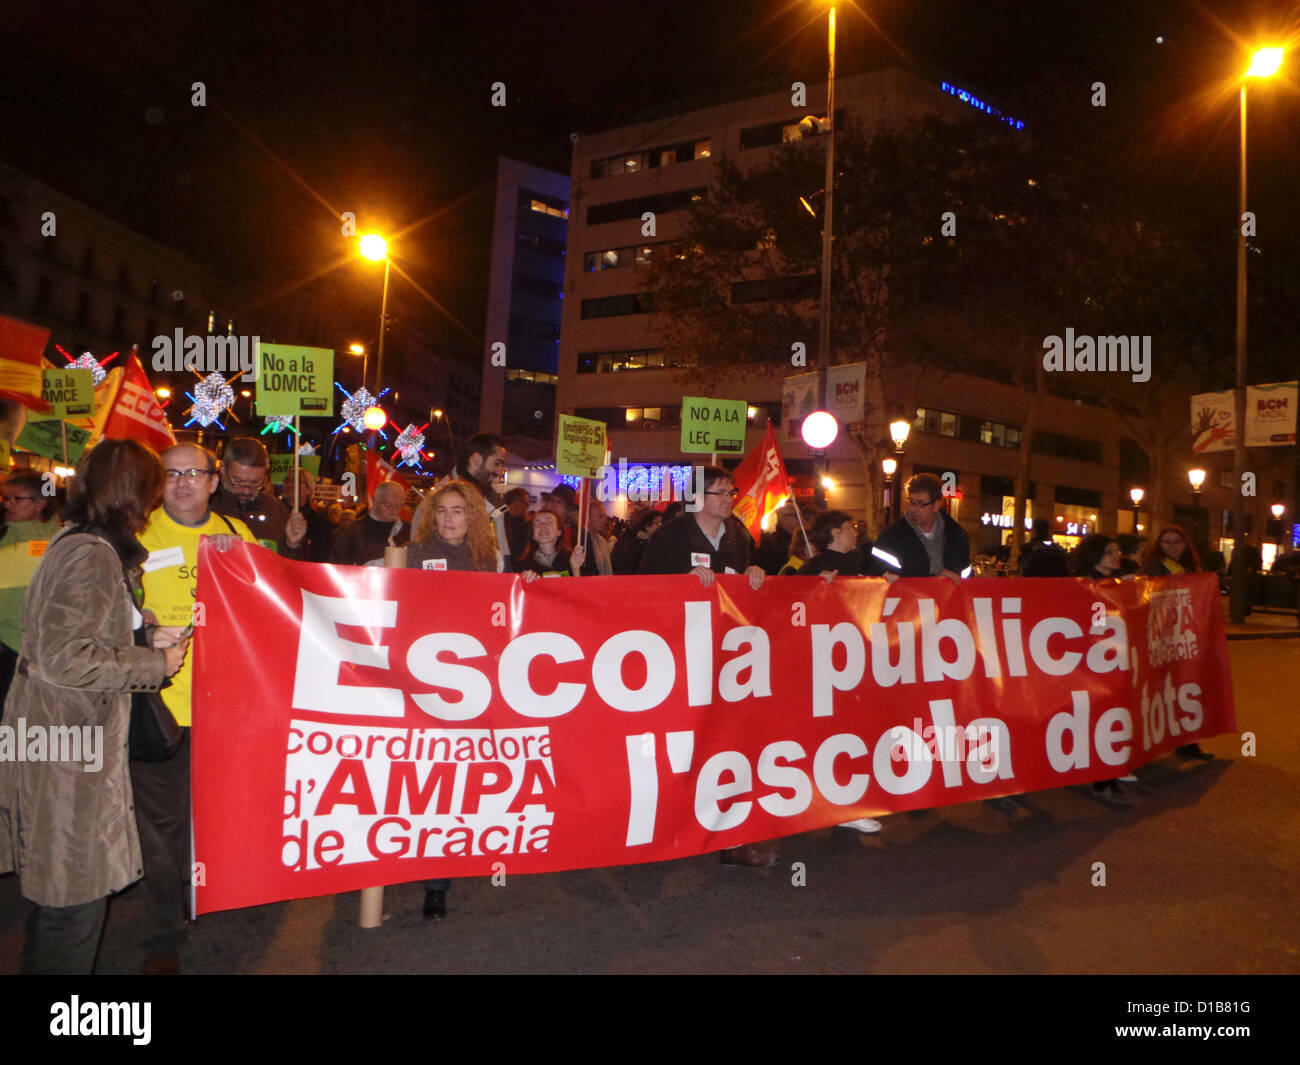 Protest in Barcelona on December 13 against the budget cuts in education and the education bill LOMCE designed by the education minister Wert. Great presence of trade unions chanted hymns against the central and regional governments. Stock Photo